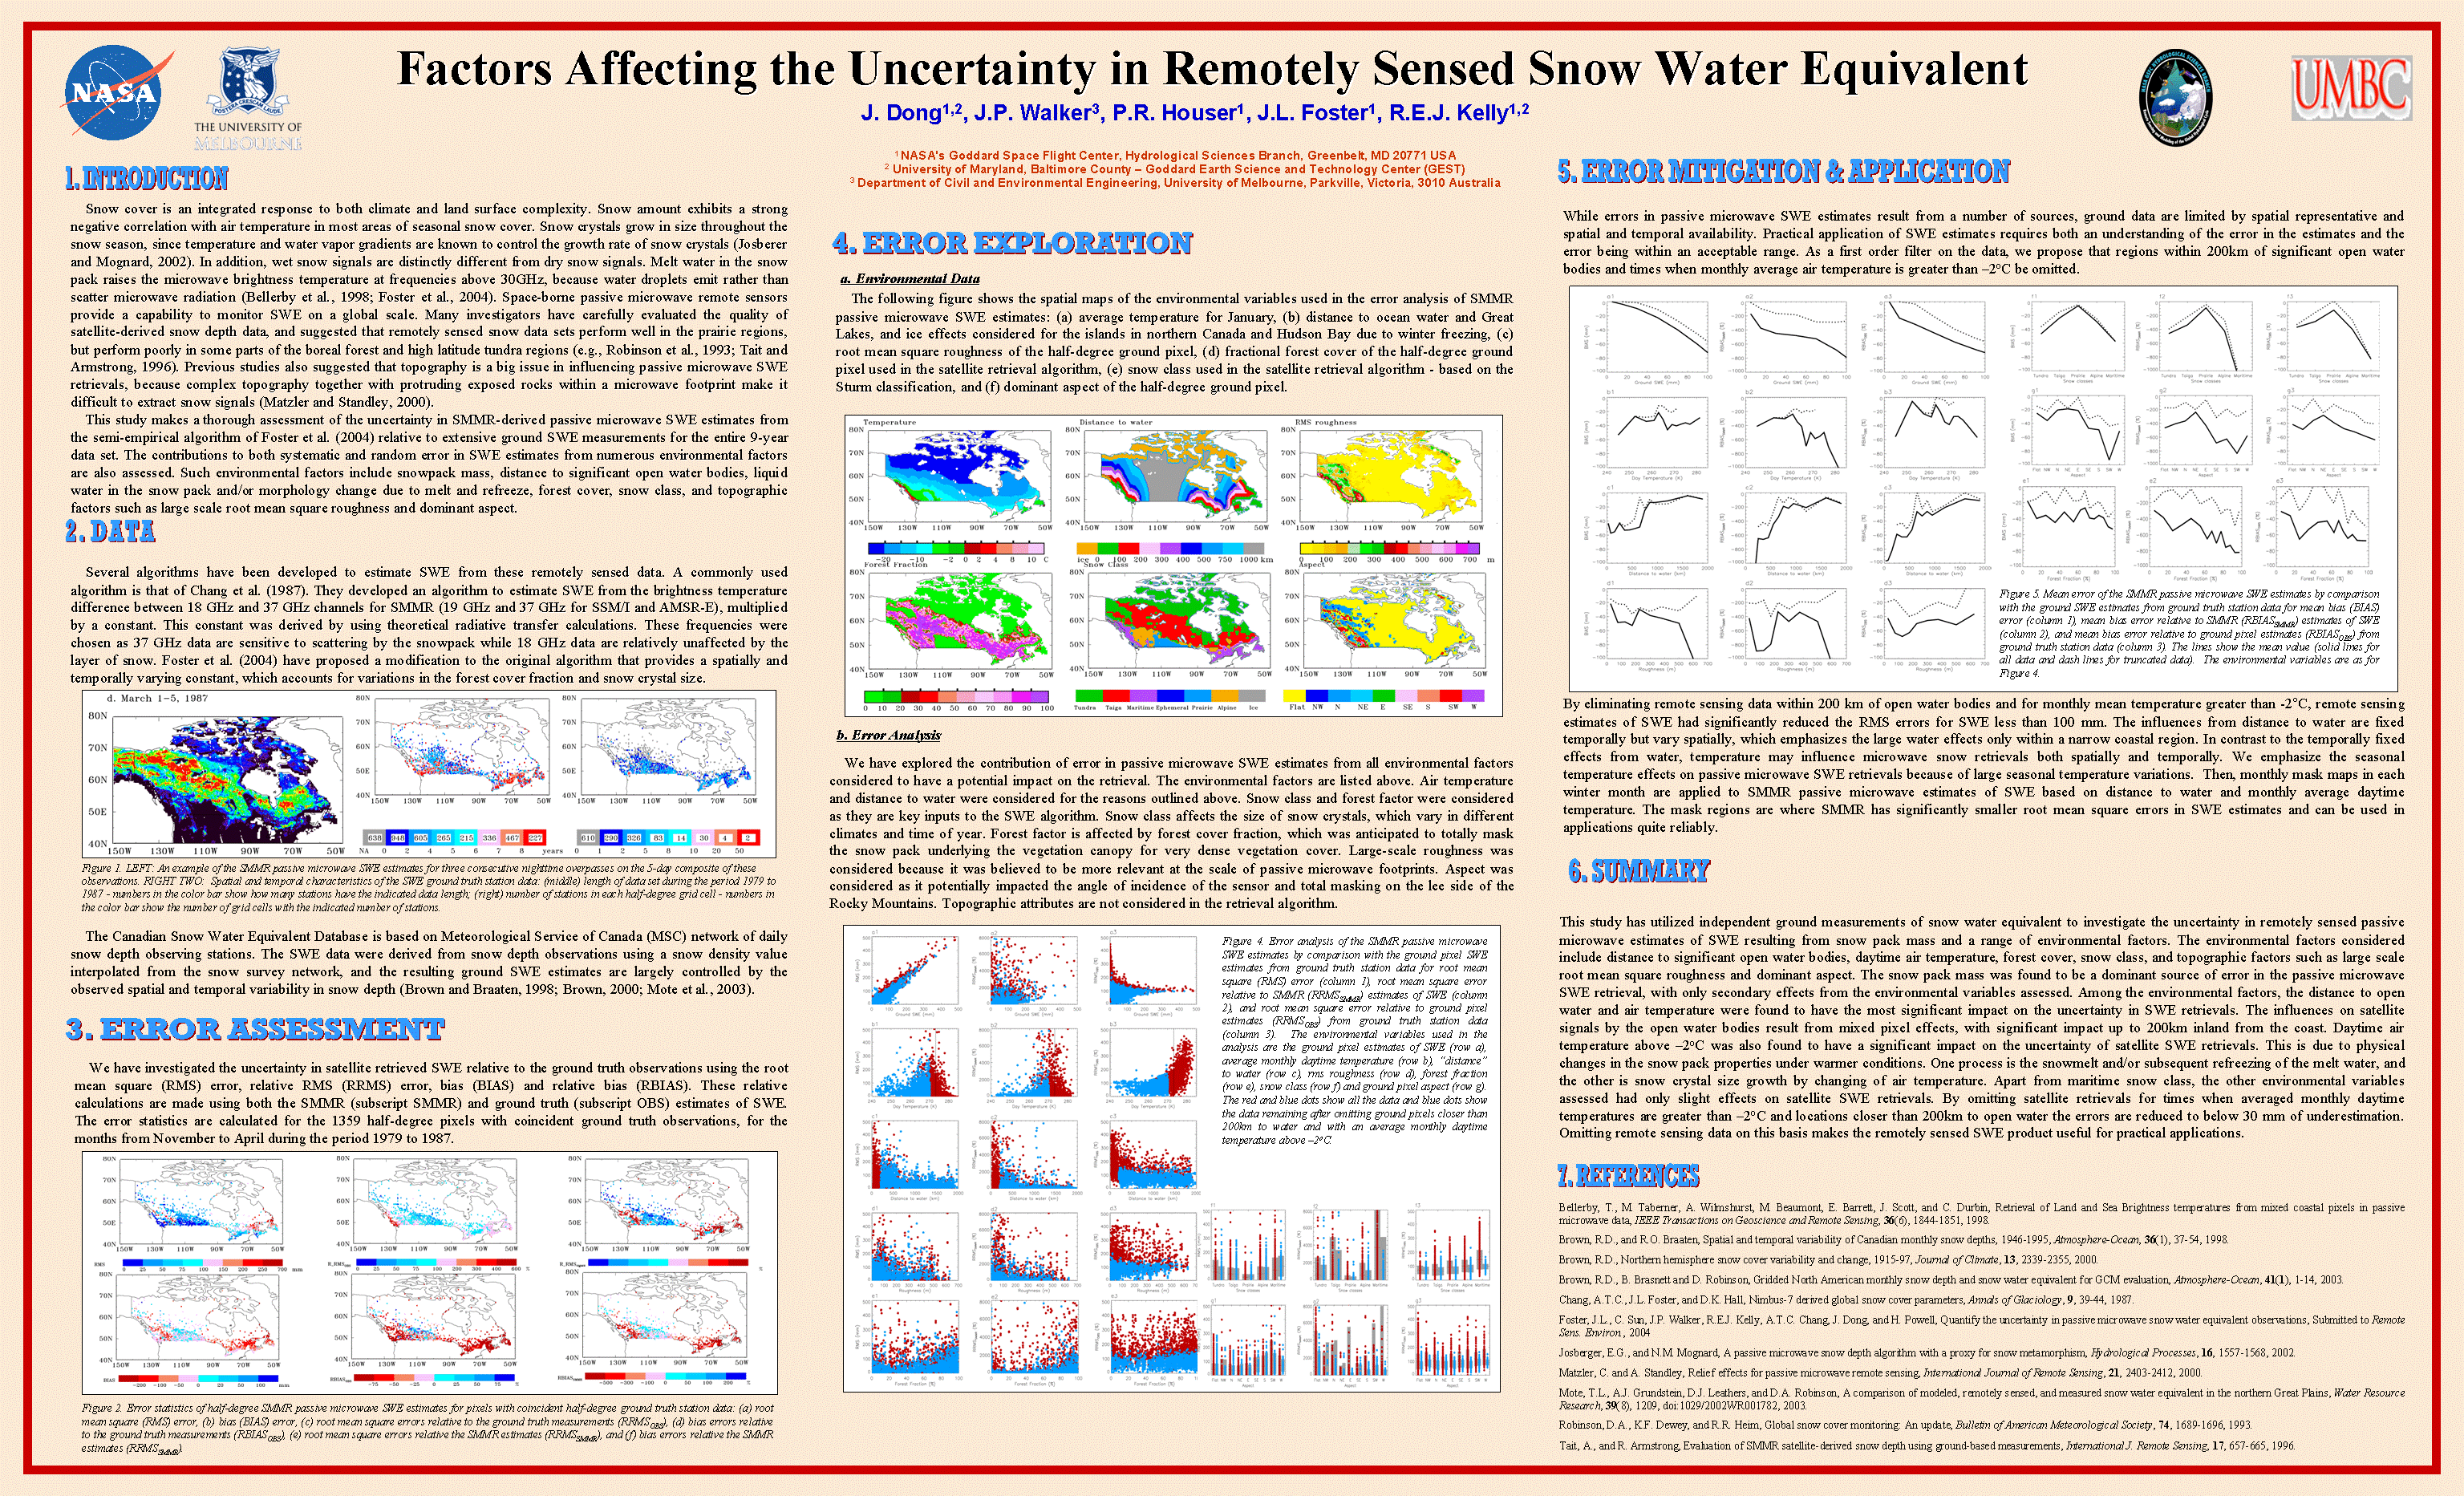 2004 Western Pacific AGU Poster